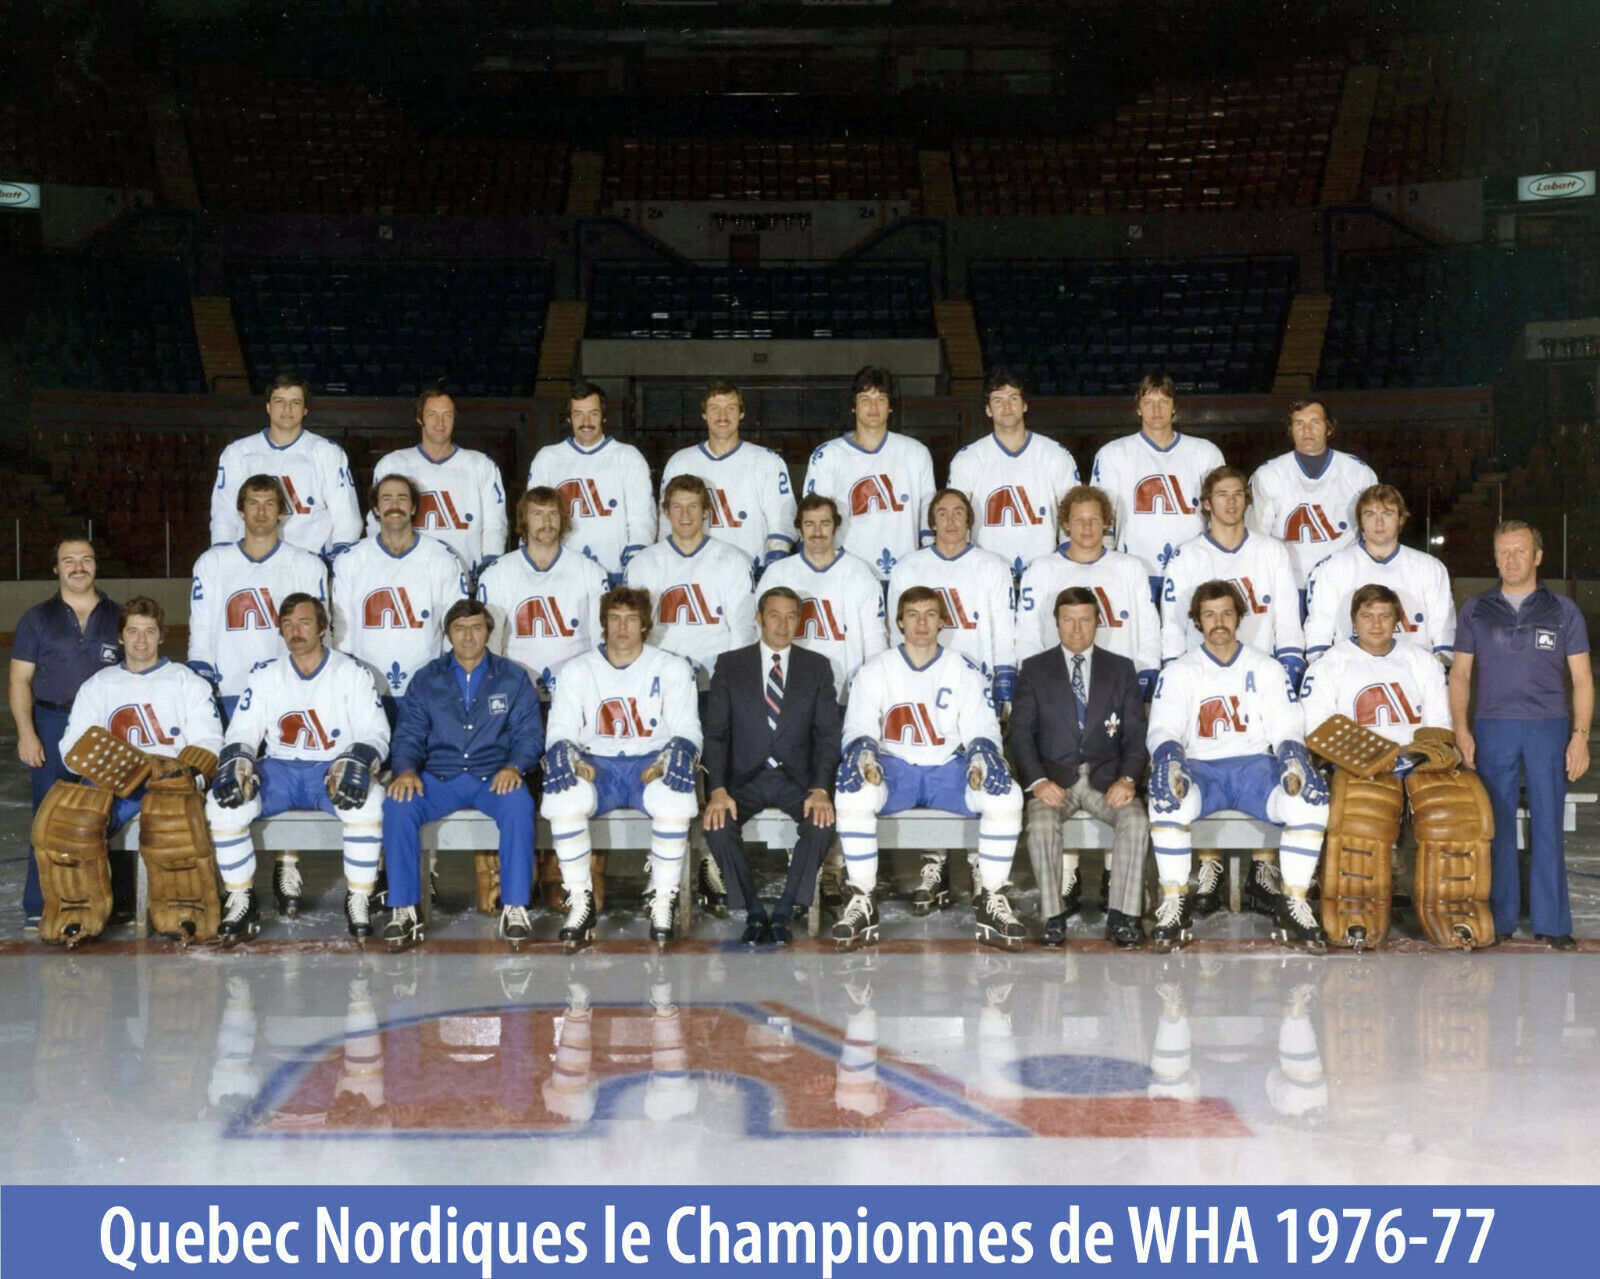 This Day In Hockey History-May 26, 1977-Quebec Nordiques Win WHA Championship, AVCO Trophy